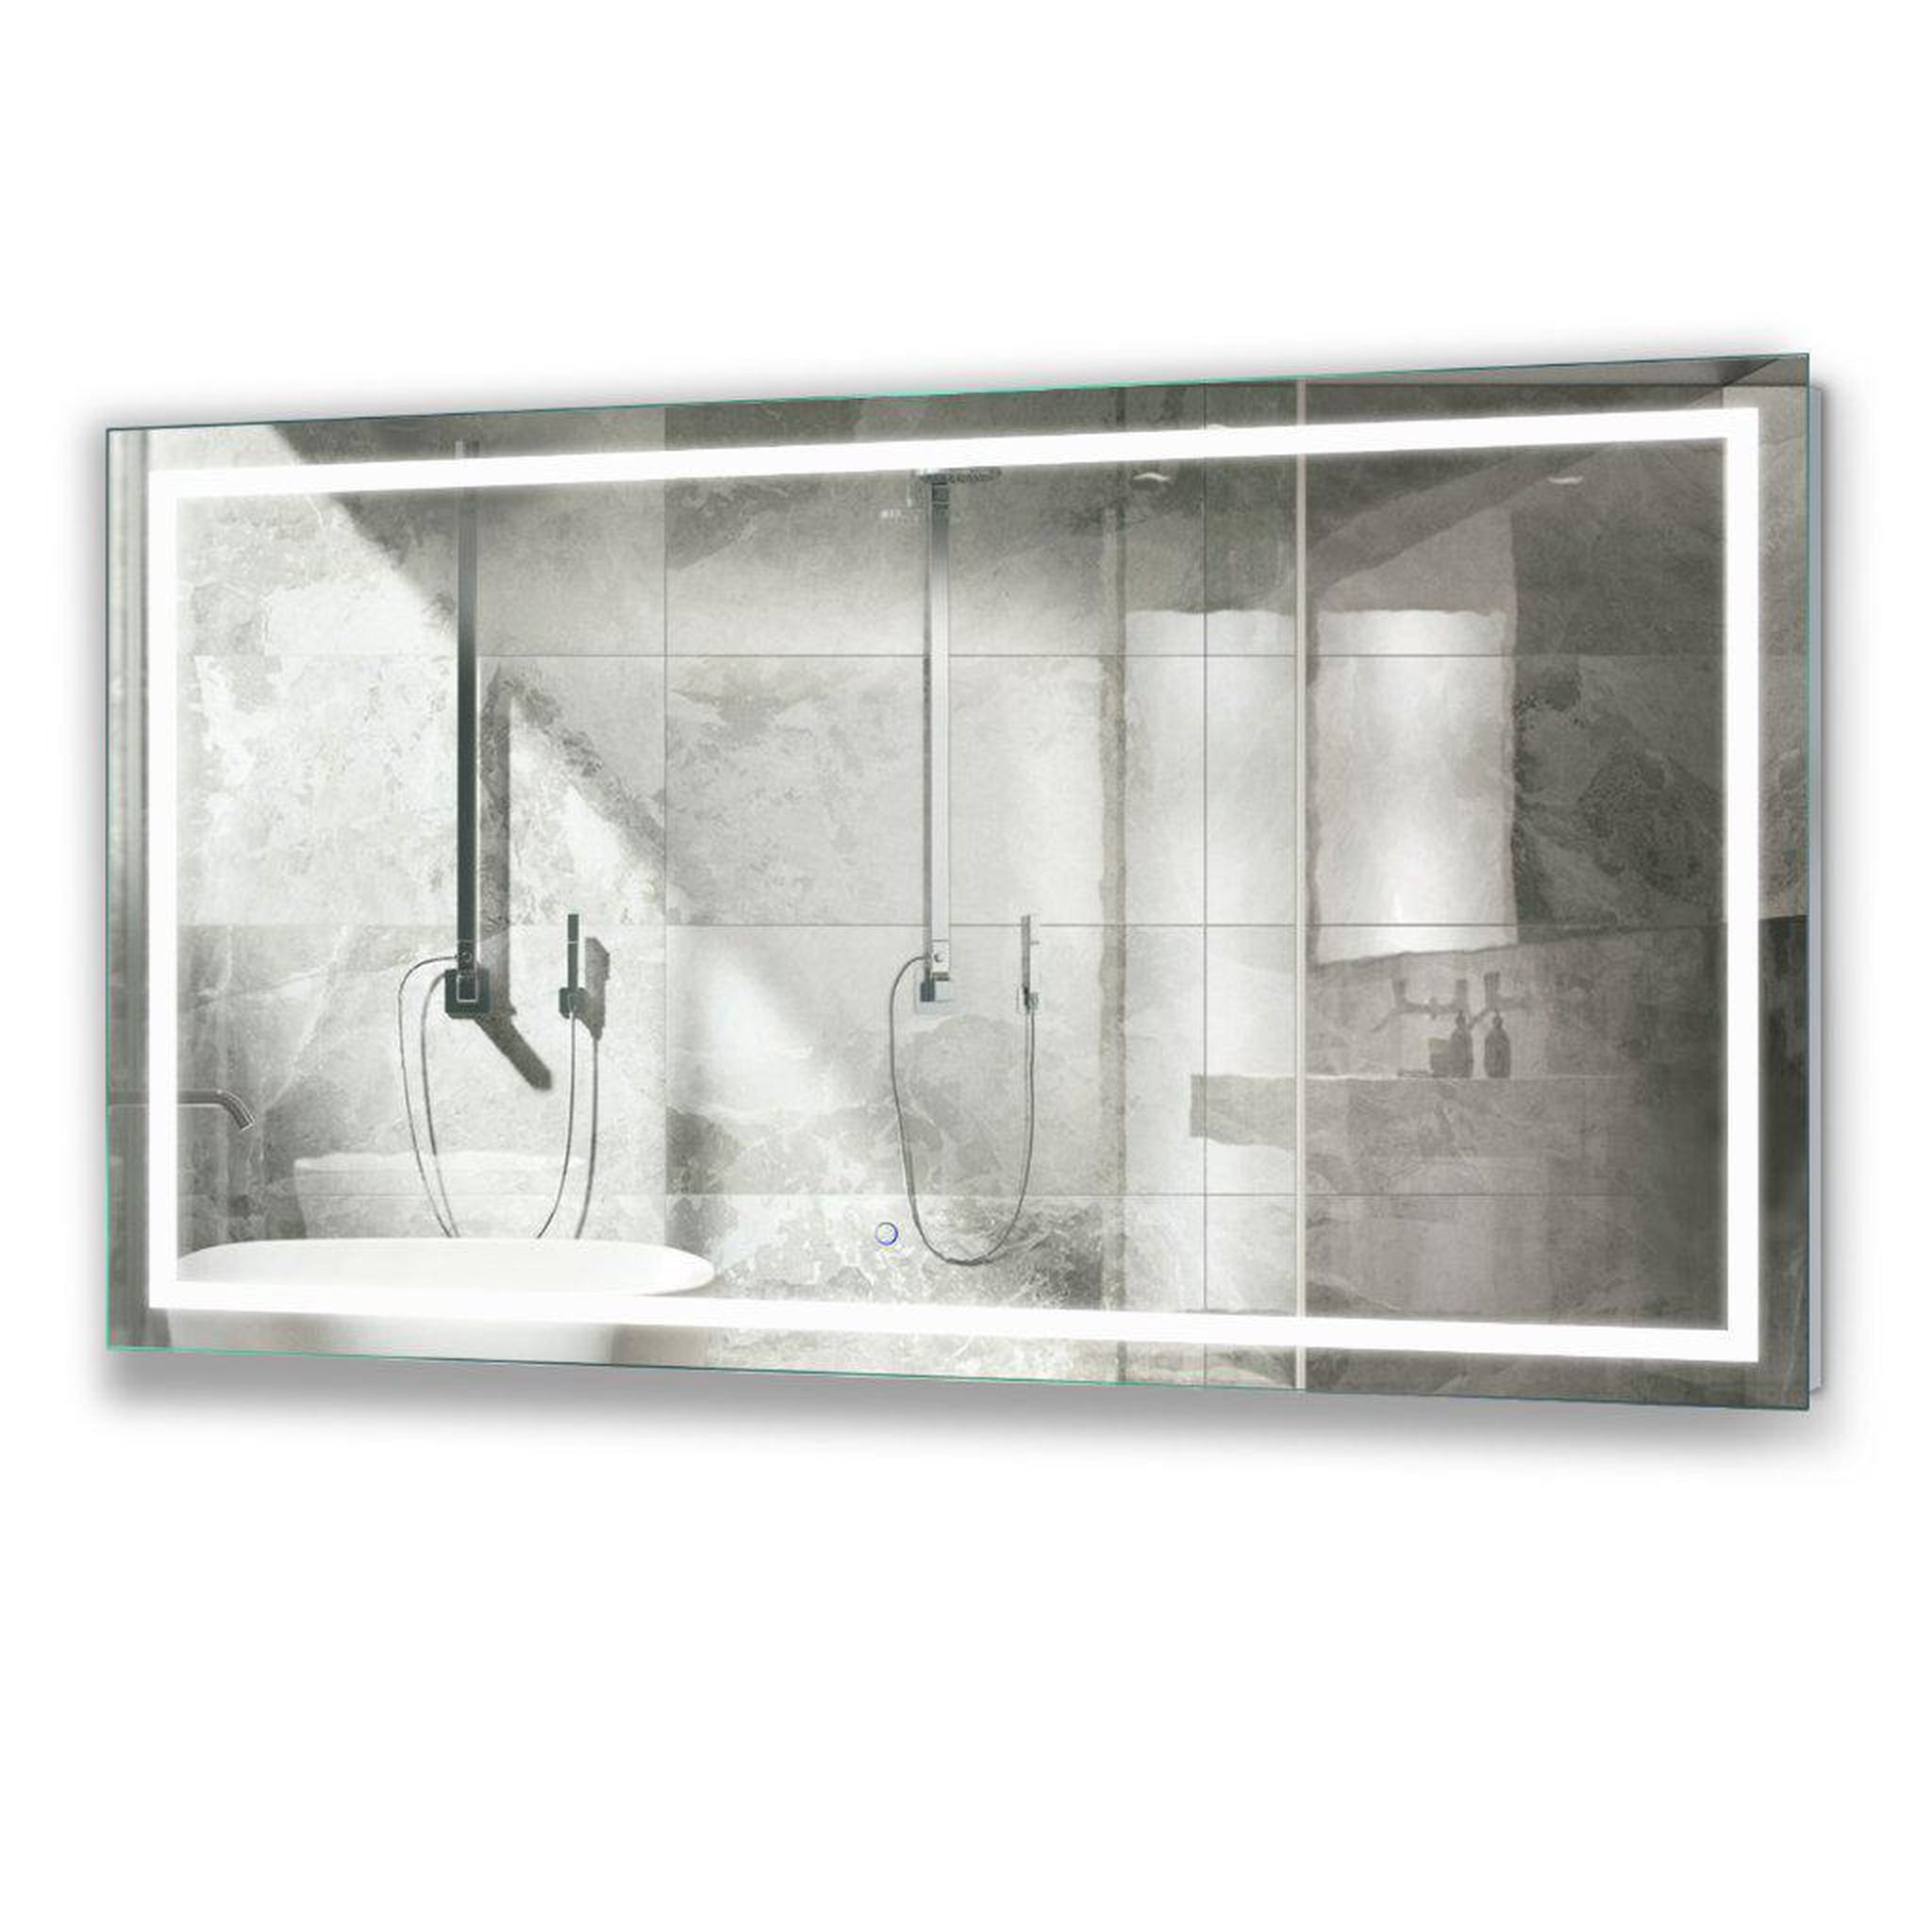 Krugg Reflections, Krugg Reflections Icon 60” x 36” 5000K Rectangular Wall-Mounted Illuminated Silver Backed LED  Mirror With Built-in Defogger and Touch Sensor On/Off Built-in Dimmer